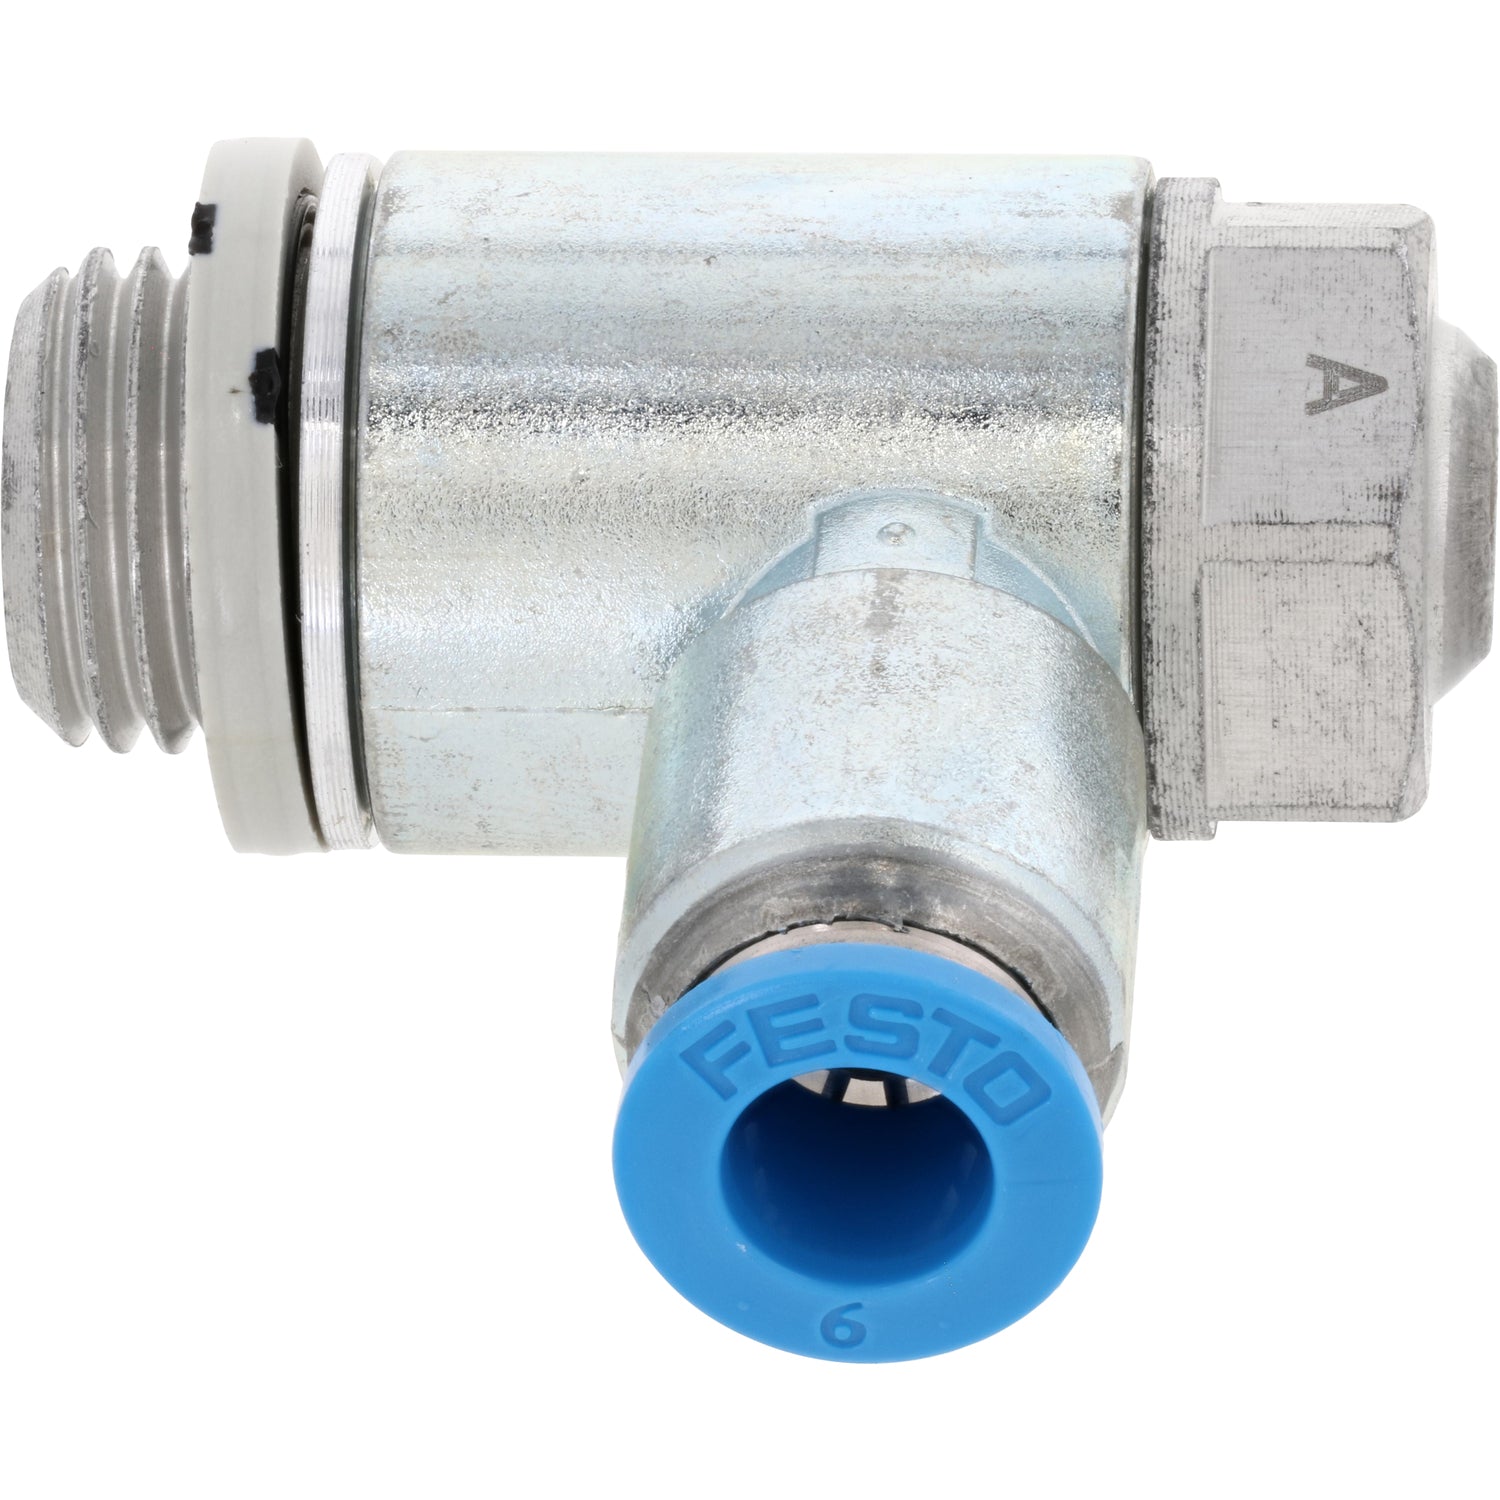 One-way flow control valve with blue press connect collar and exposed threads. Part shown on white background. 